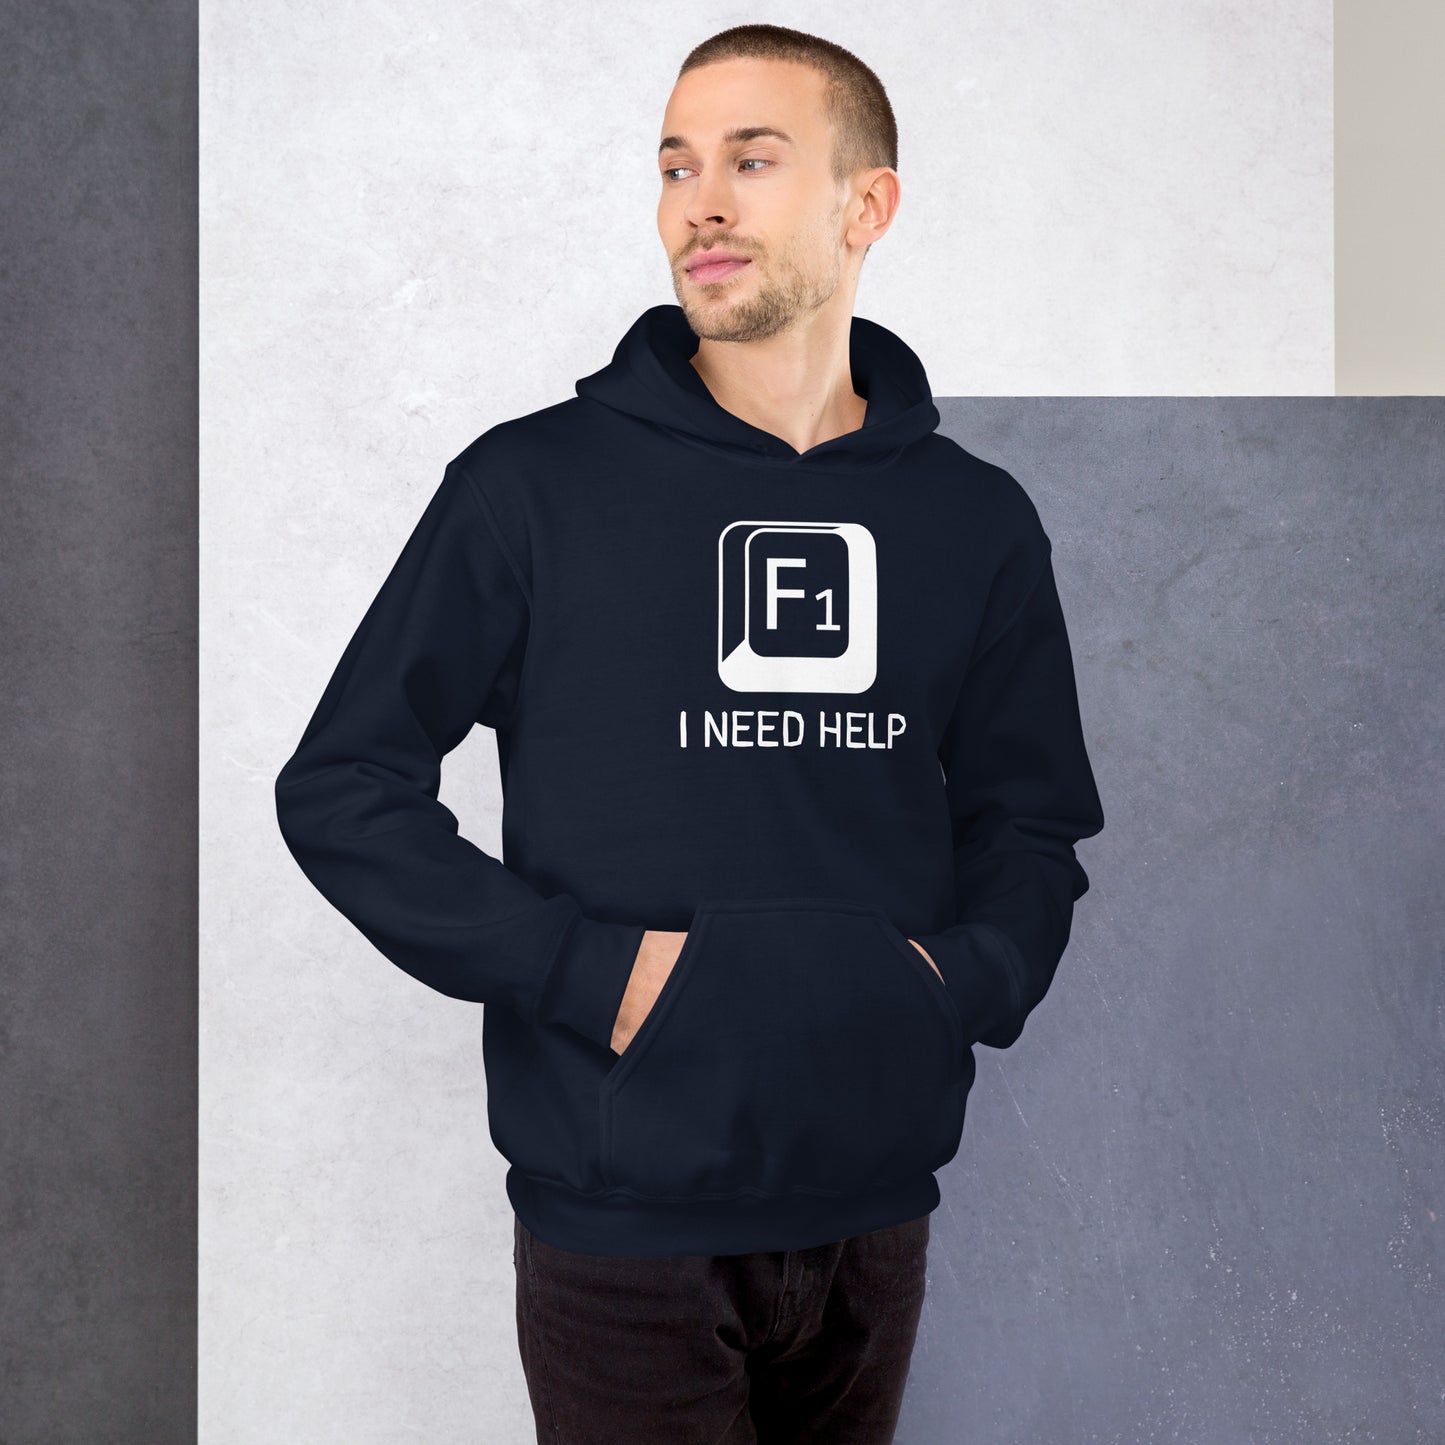 Men with navy hoodie and a picture of F1 key with text "I need help"